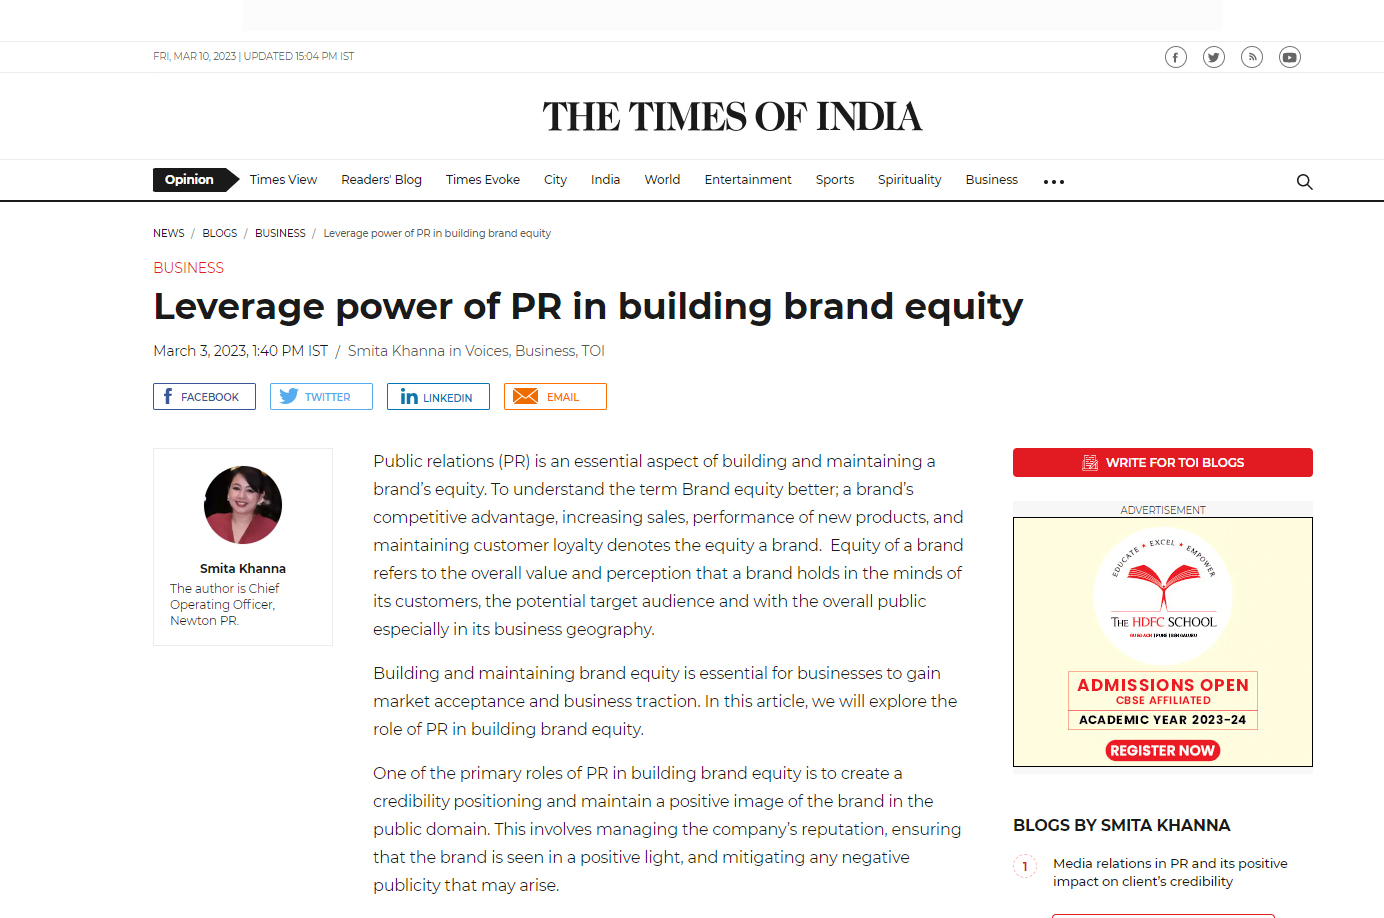 times-of-india-power-of-pr-building-brand-equity-written-by-smita-khanna